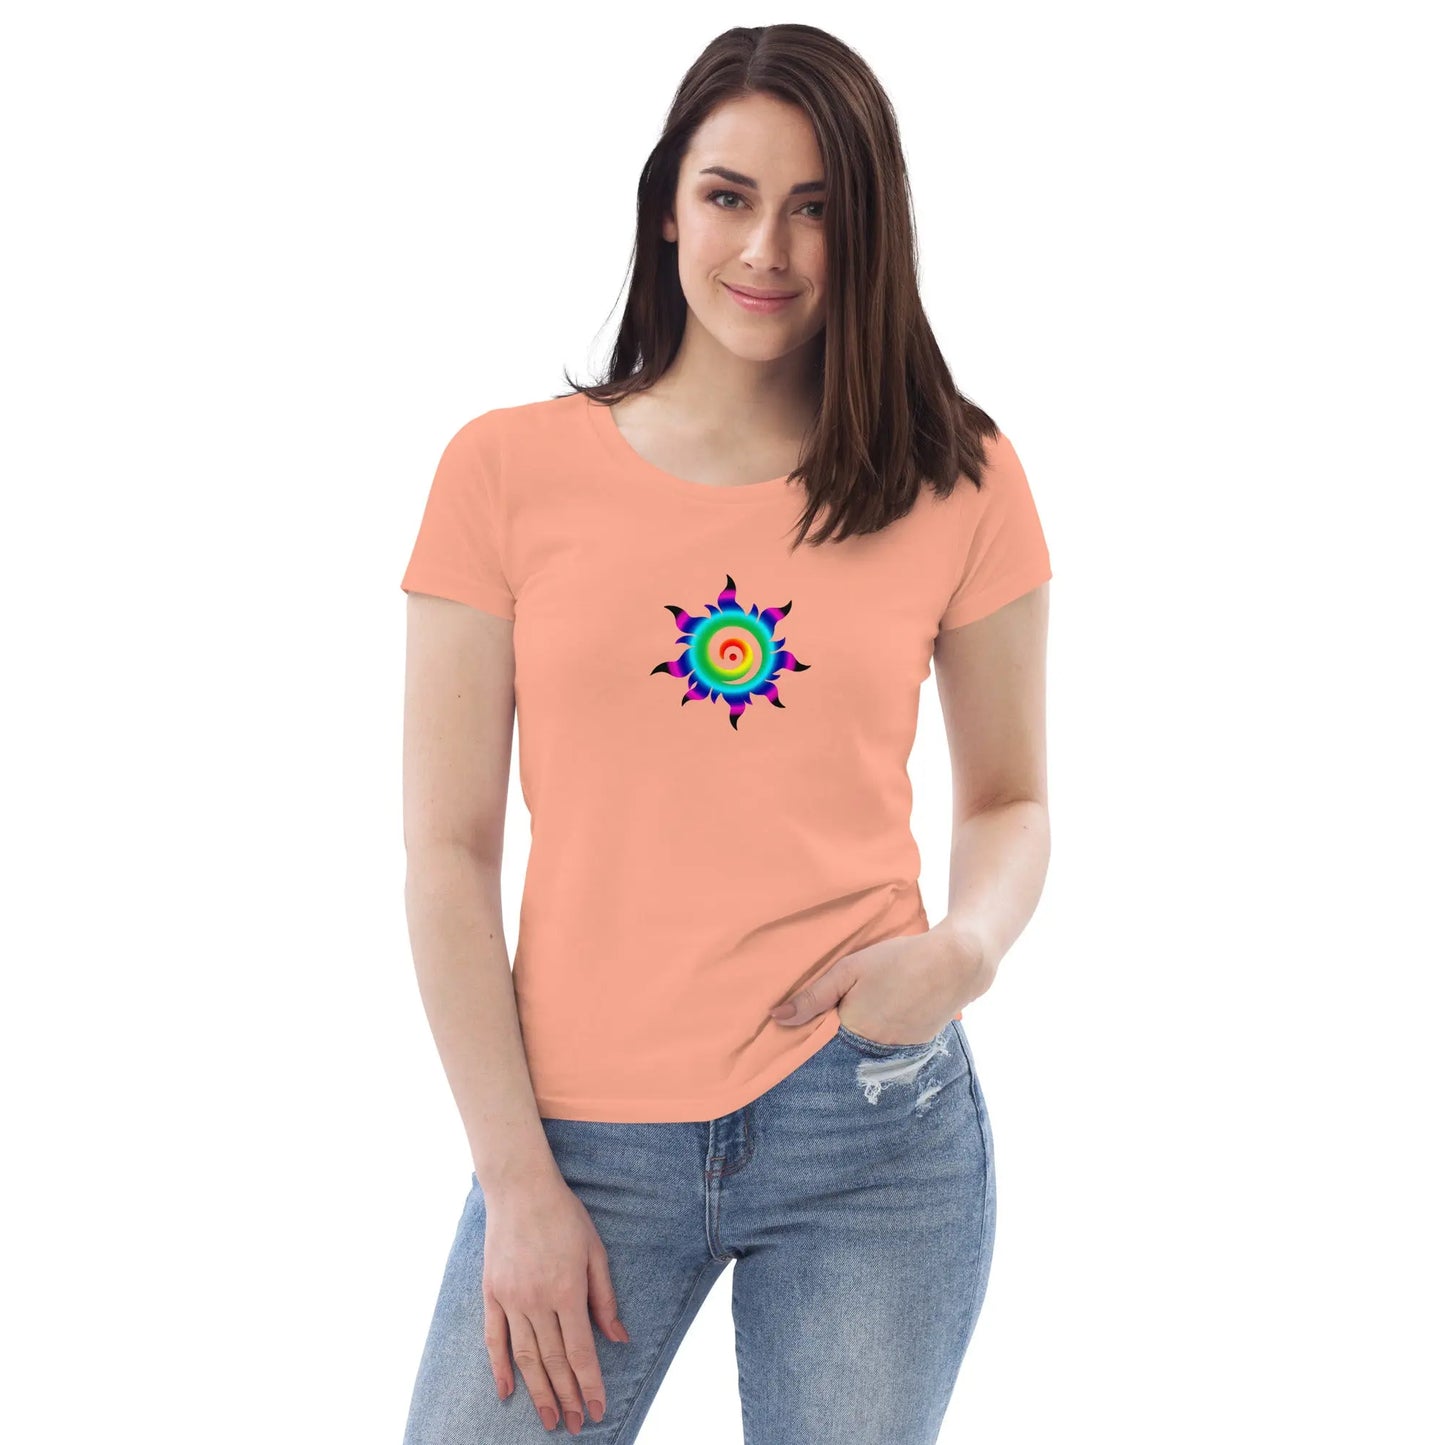 Women's fitted eco tee ActSunx - Image #9